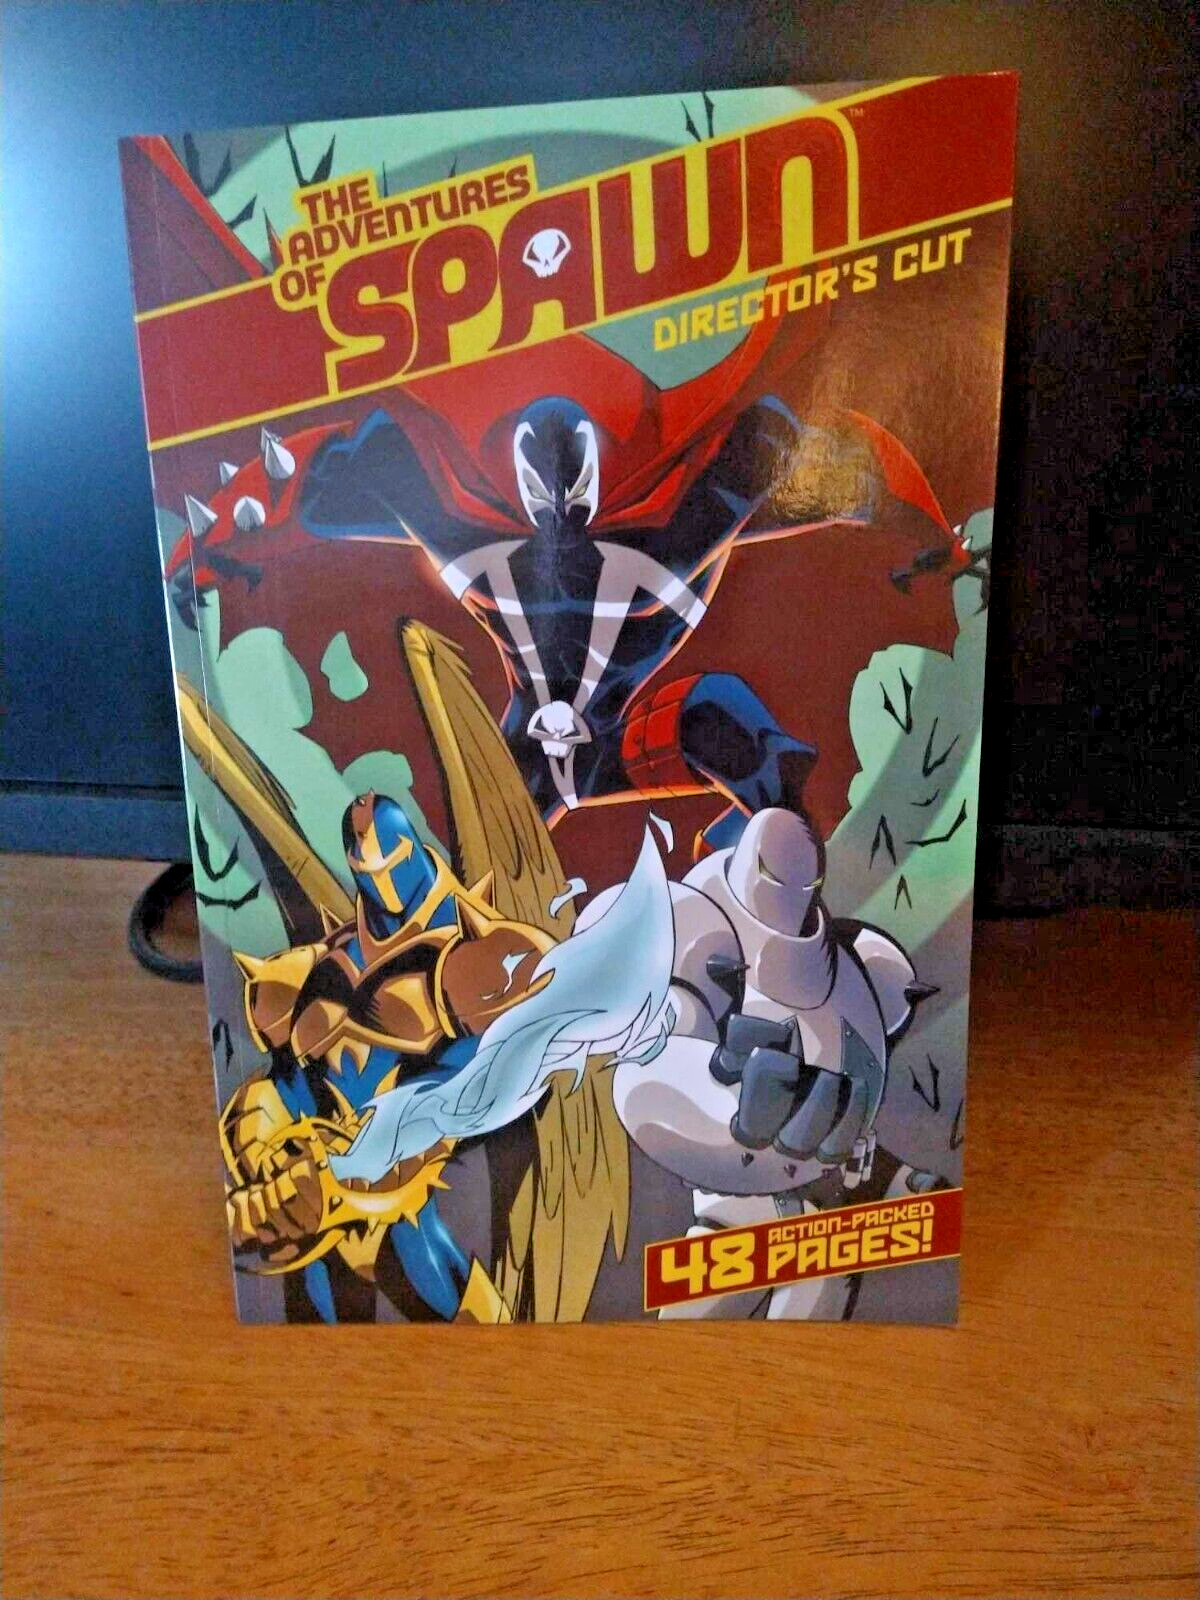 The Adventures of Spawn Director's Cut #1 48 Page comic MCC Productions